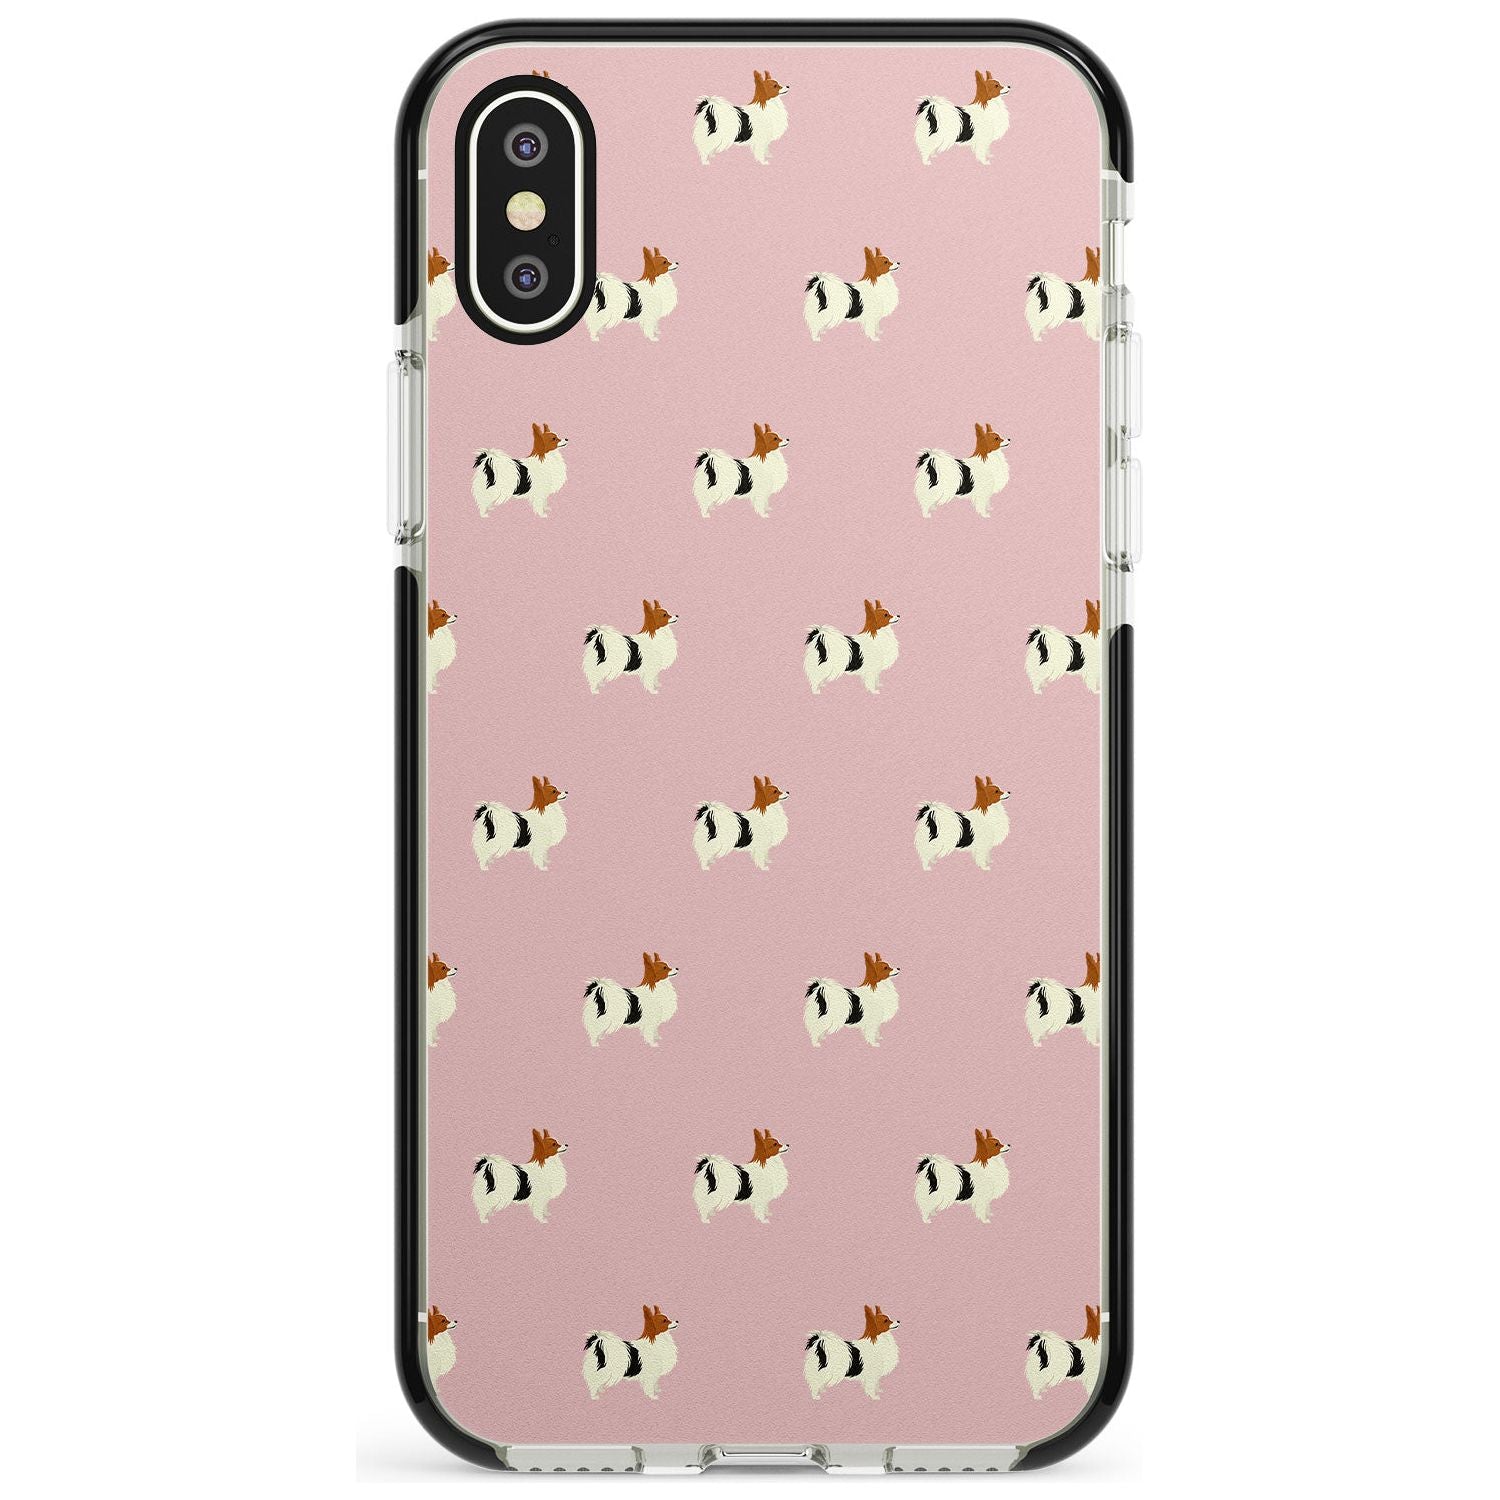 Papillon Dog Pattern Black Impact Phone Case for iPhone X XS Max XR